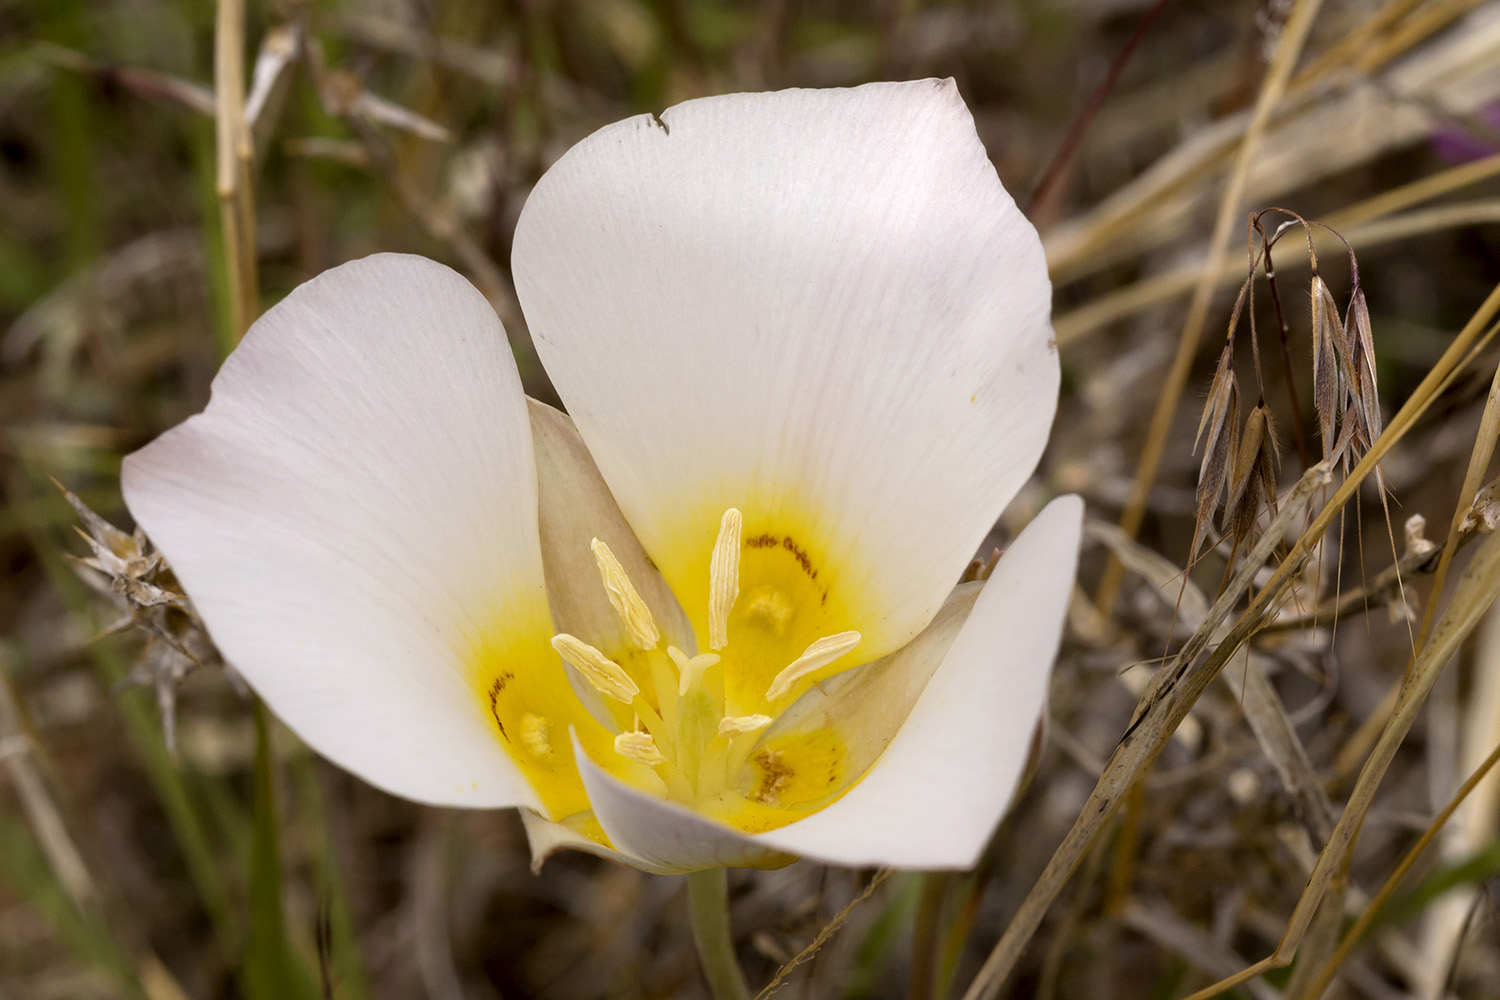 A white flower with yellow toward the center, and tiny brownish red lines marking the yellow sections